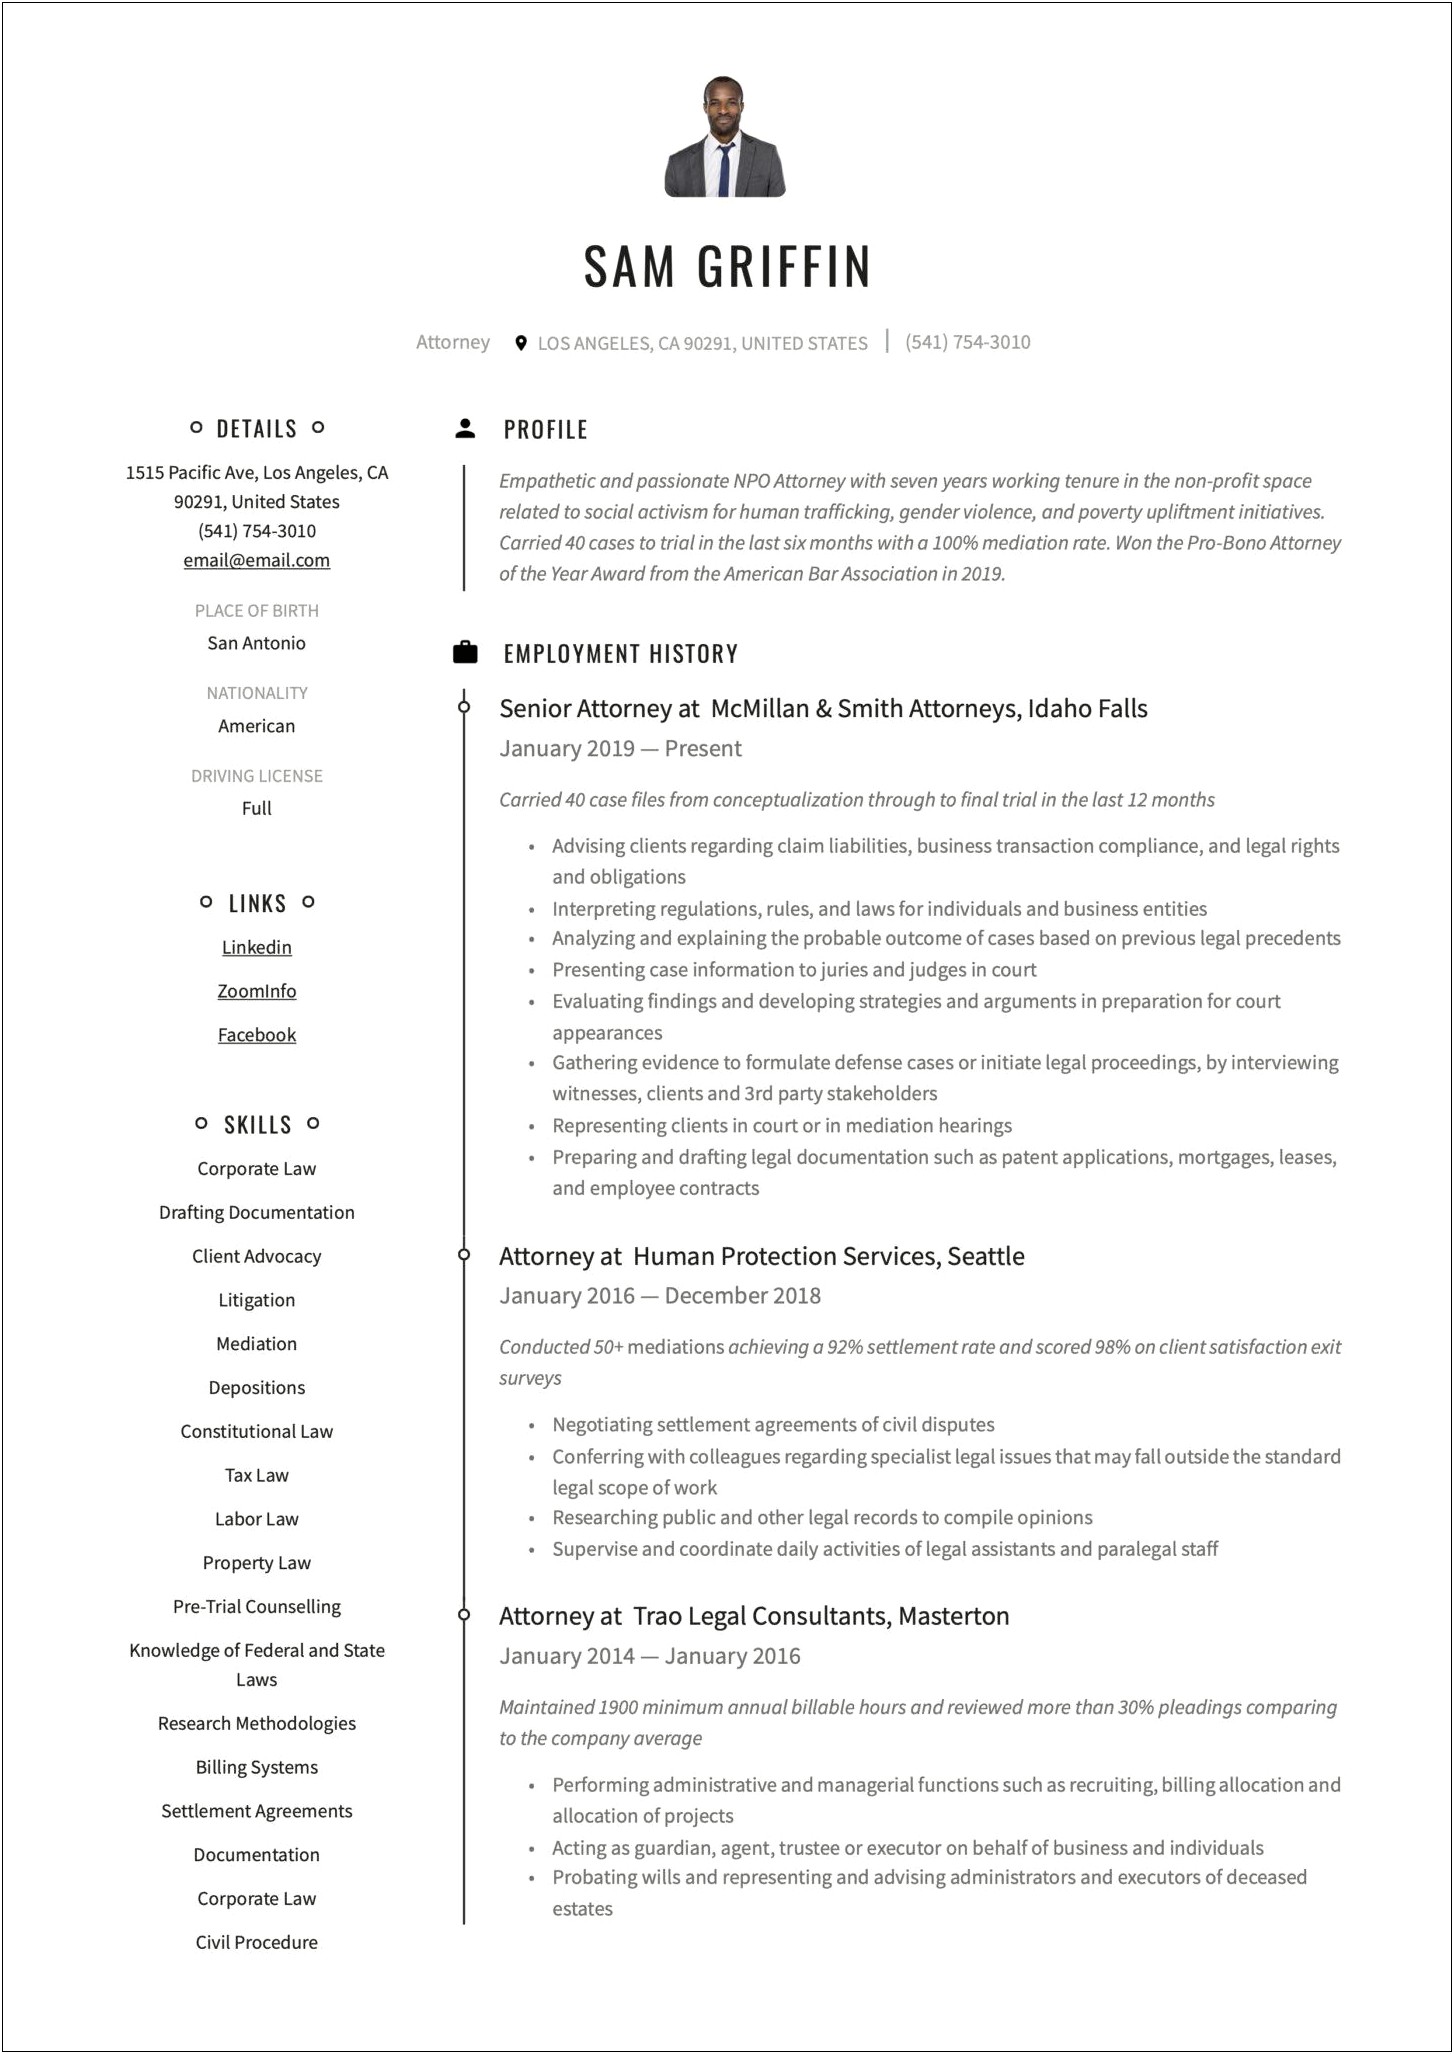 Corporate Counsel Lawyer Resume Sample